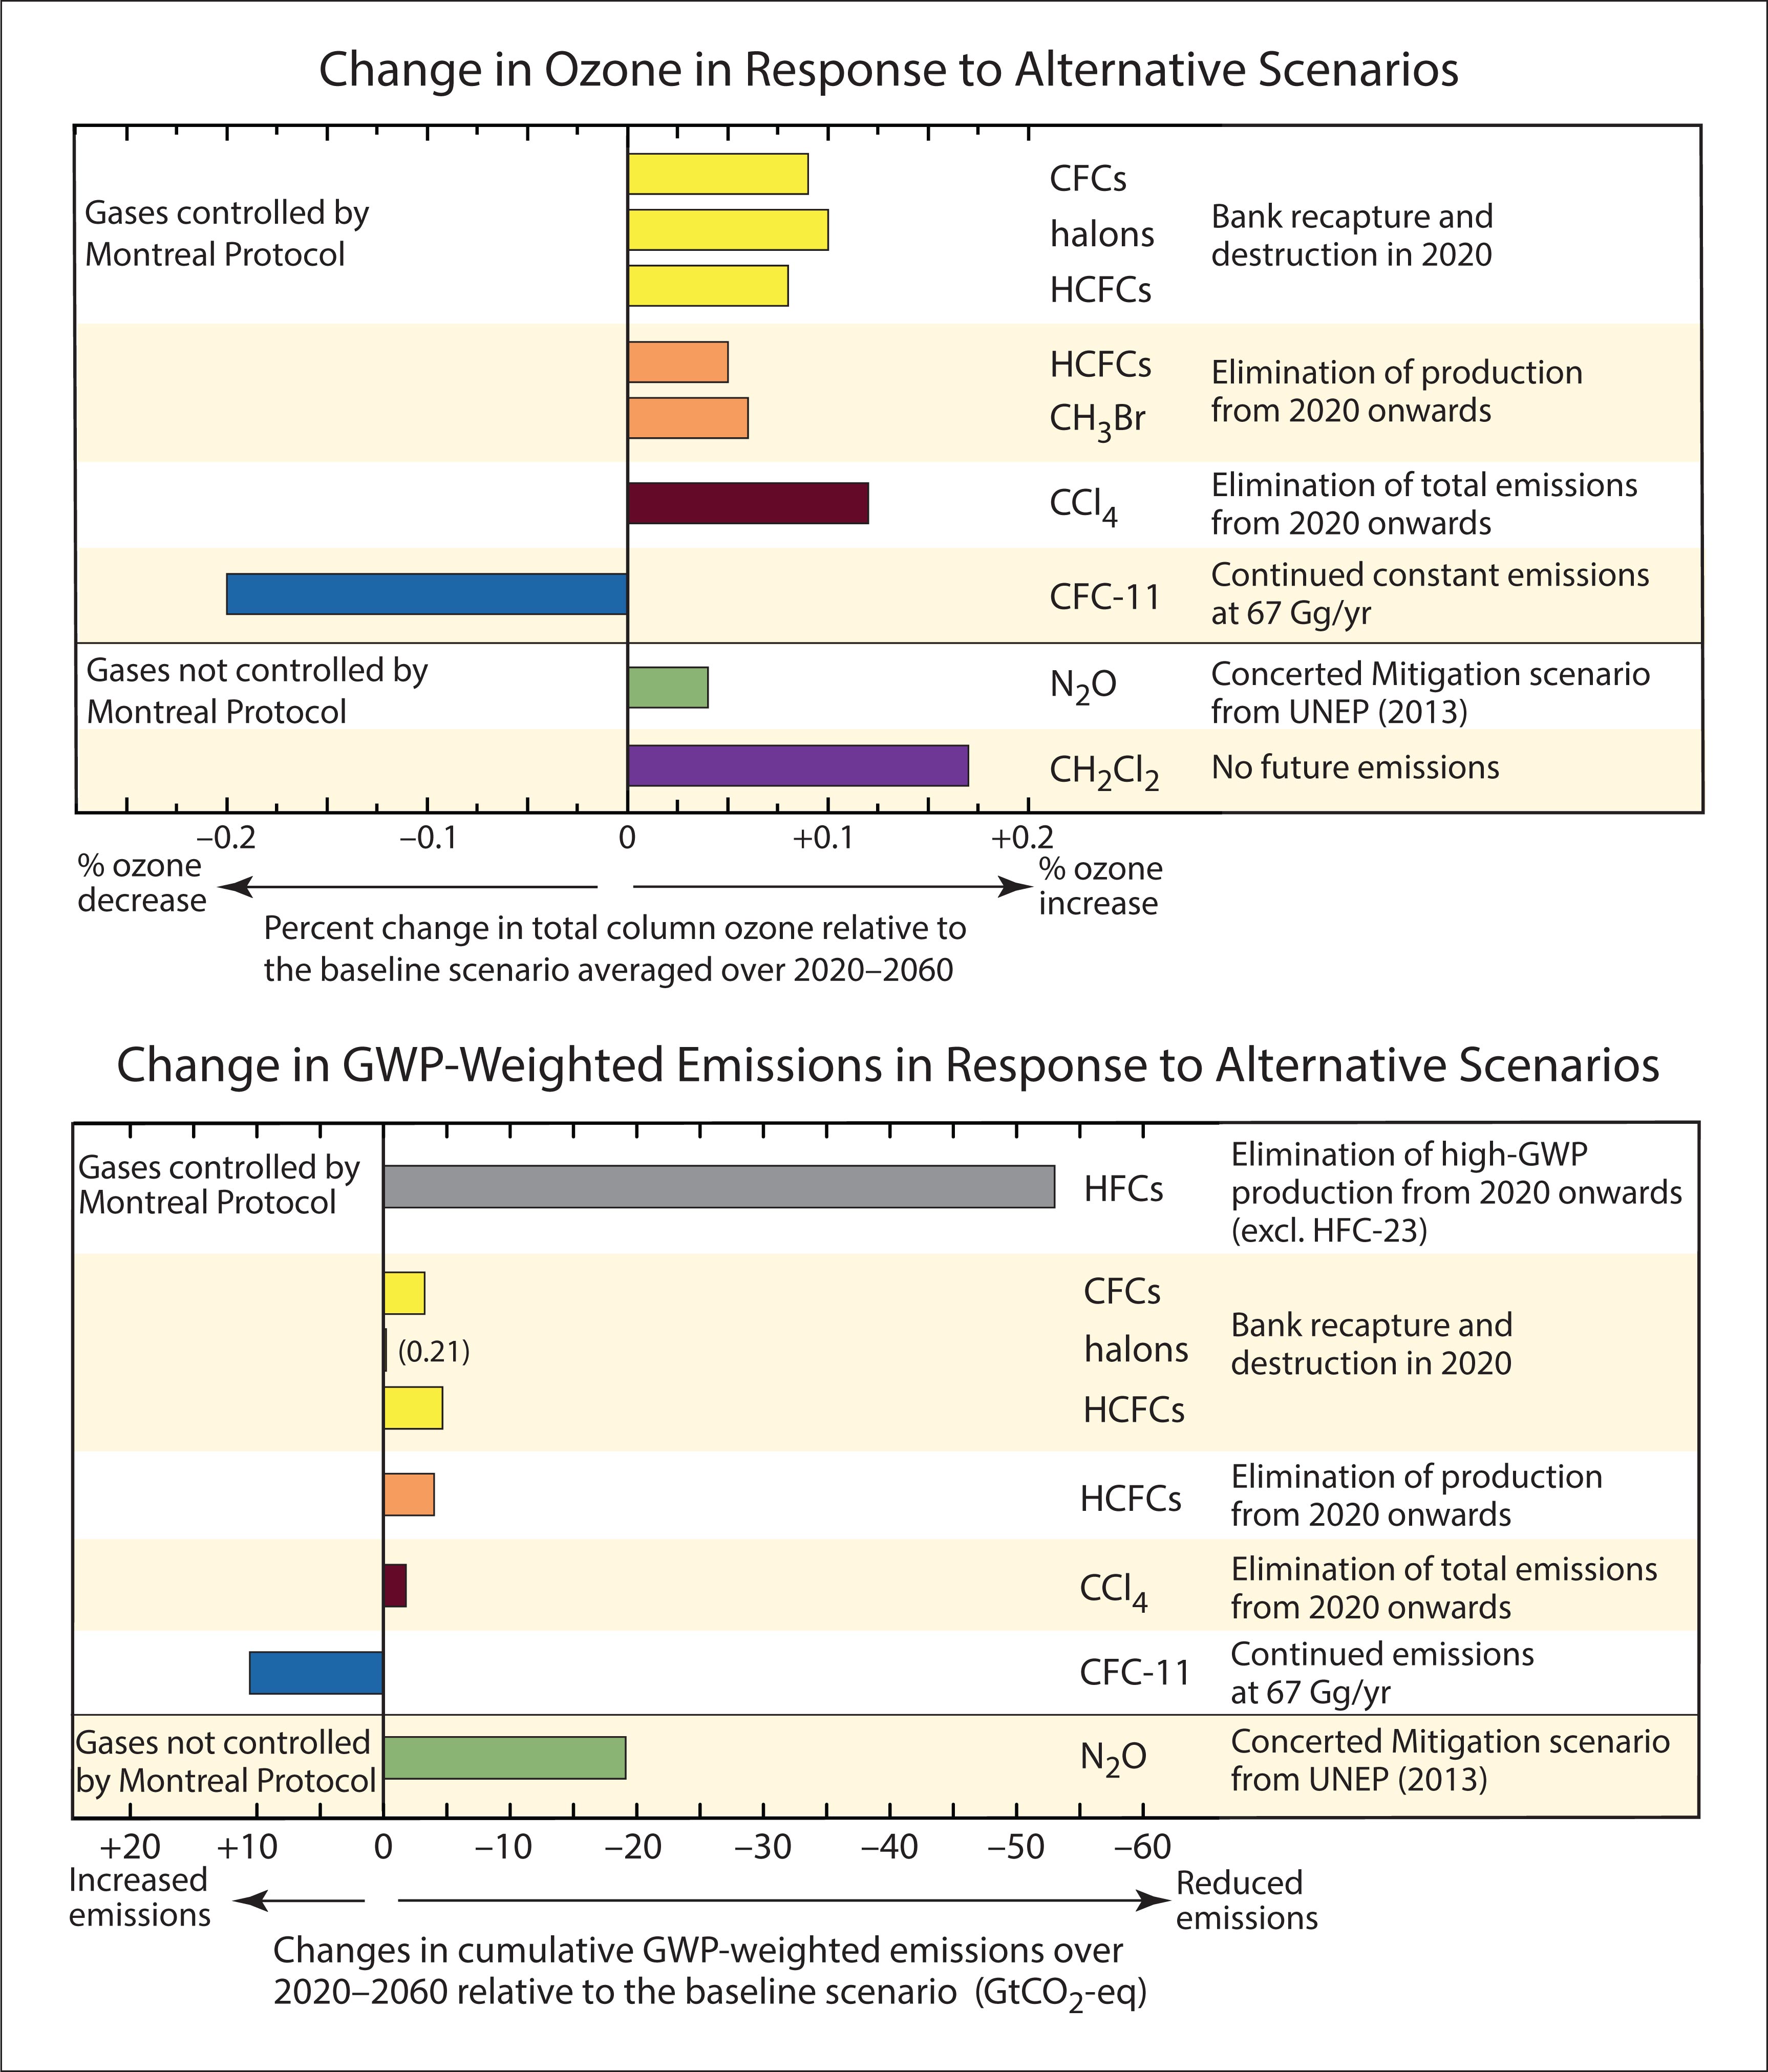 Changes in ozone and GWP-weighted emissions for a selection of alternative scenarios